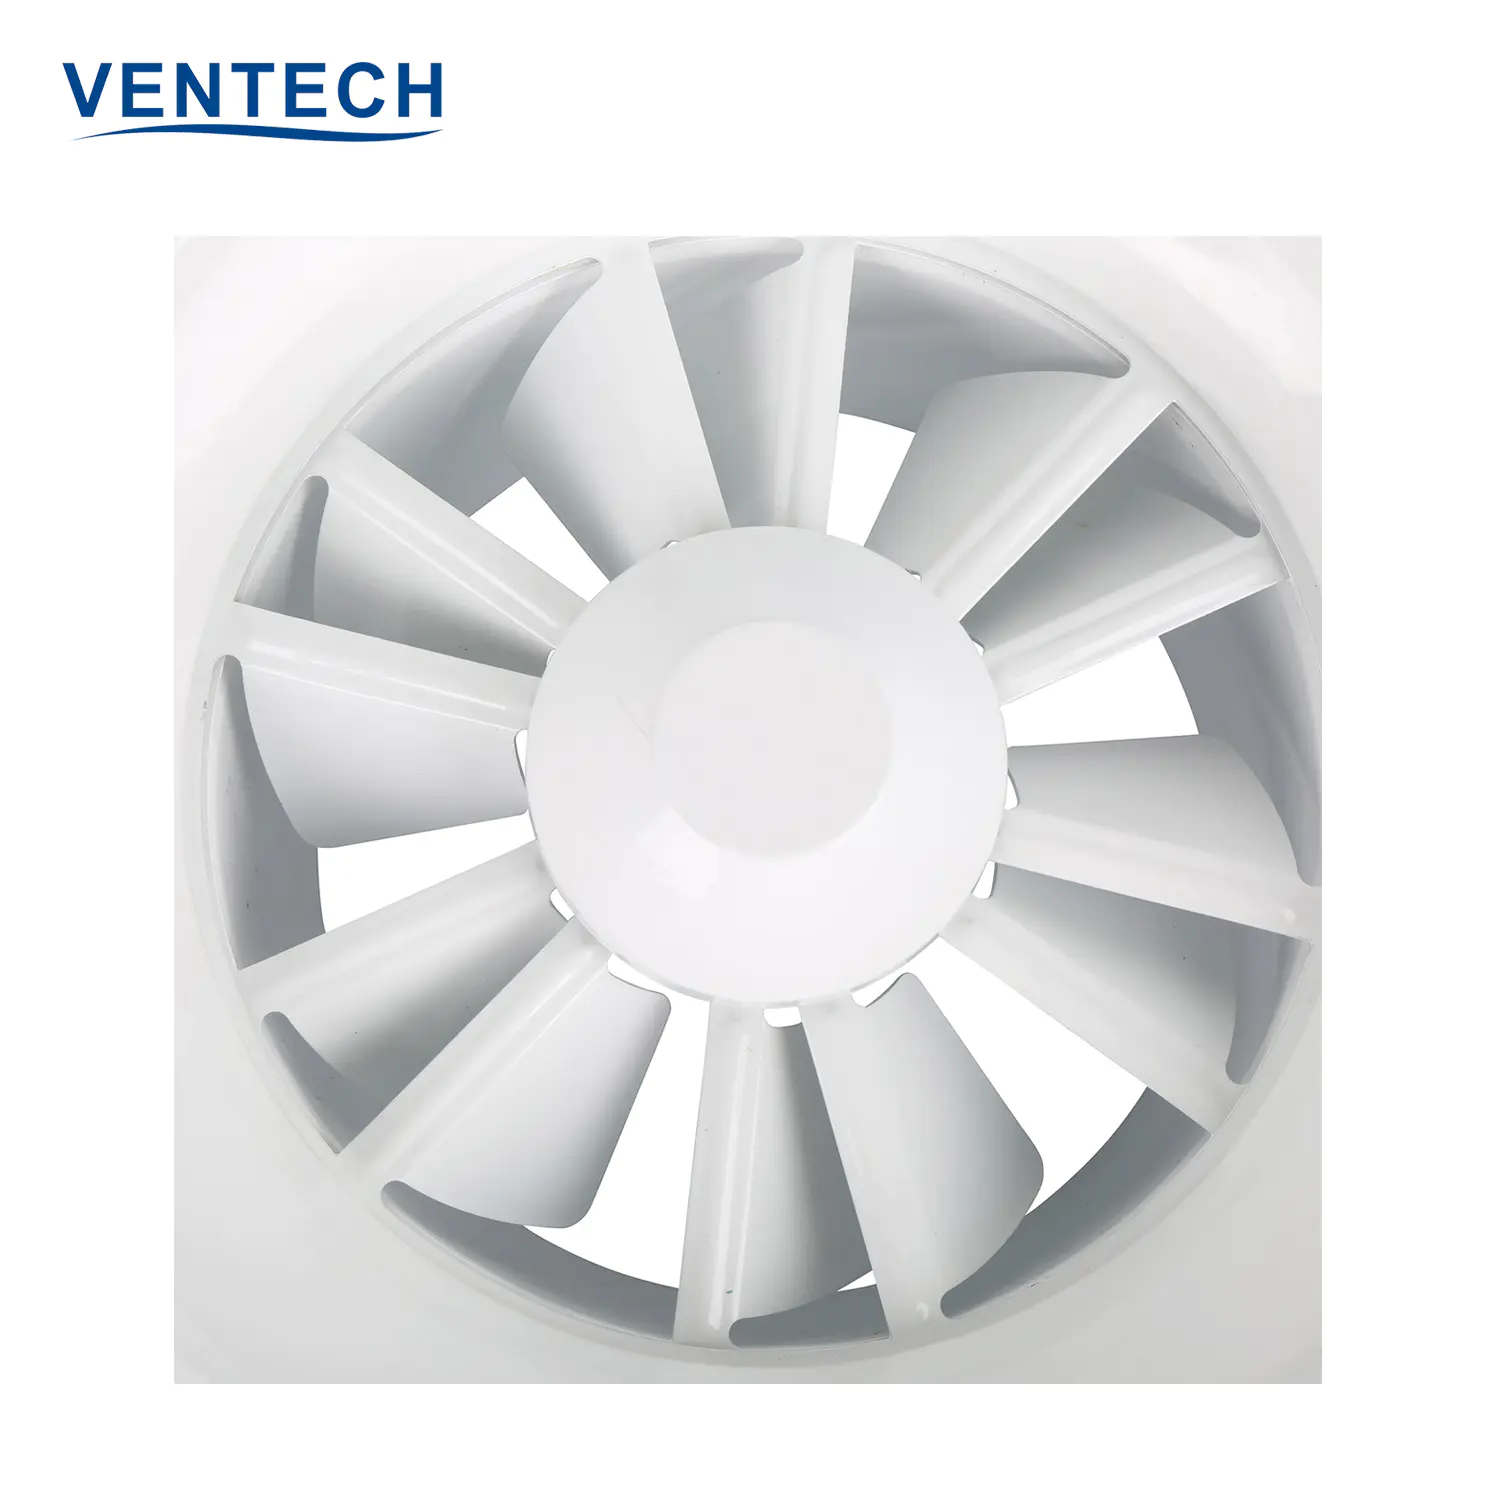 Ventech customized Vane Axial Fan Aluminum alloy Adjustable Blades Swirl Air Diffuser for Swirl diffuser